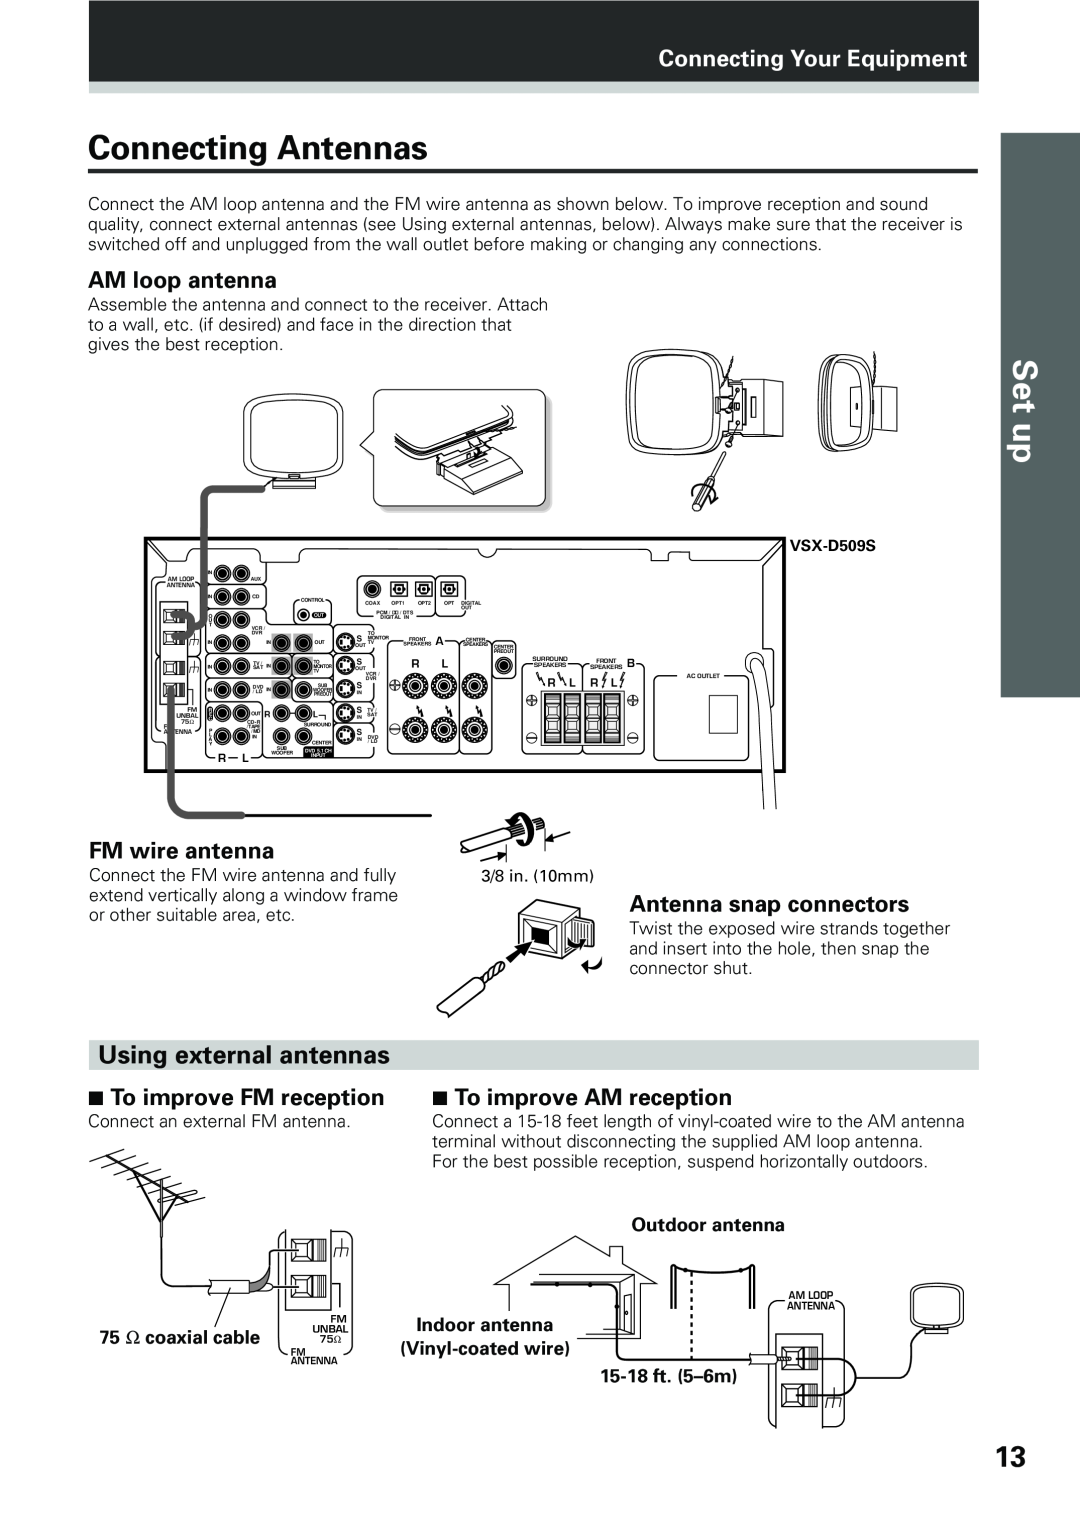 Pioneer VSX-D409 manual Connecting Antennas, Using external antennas, Set up, Connecting Your Equipment, AM loop antenna 